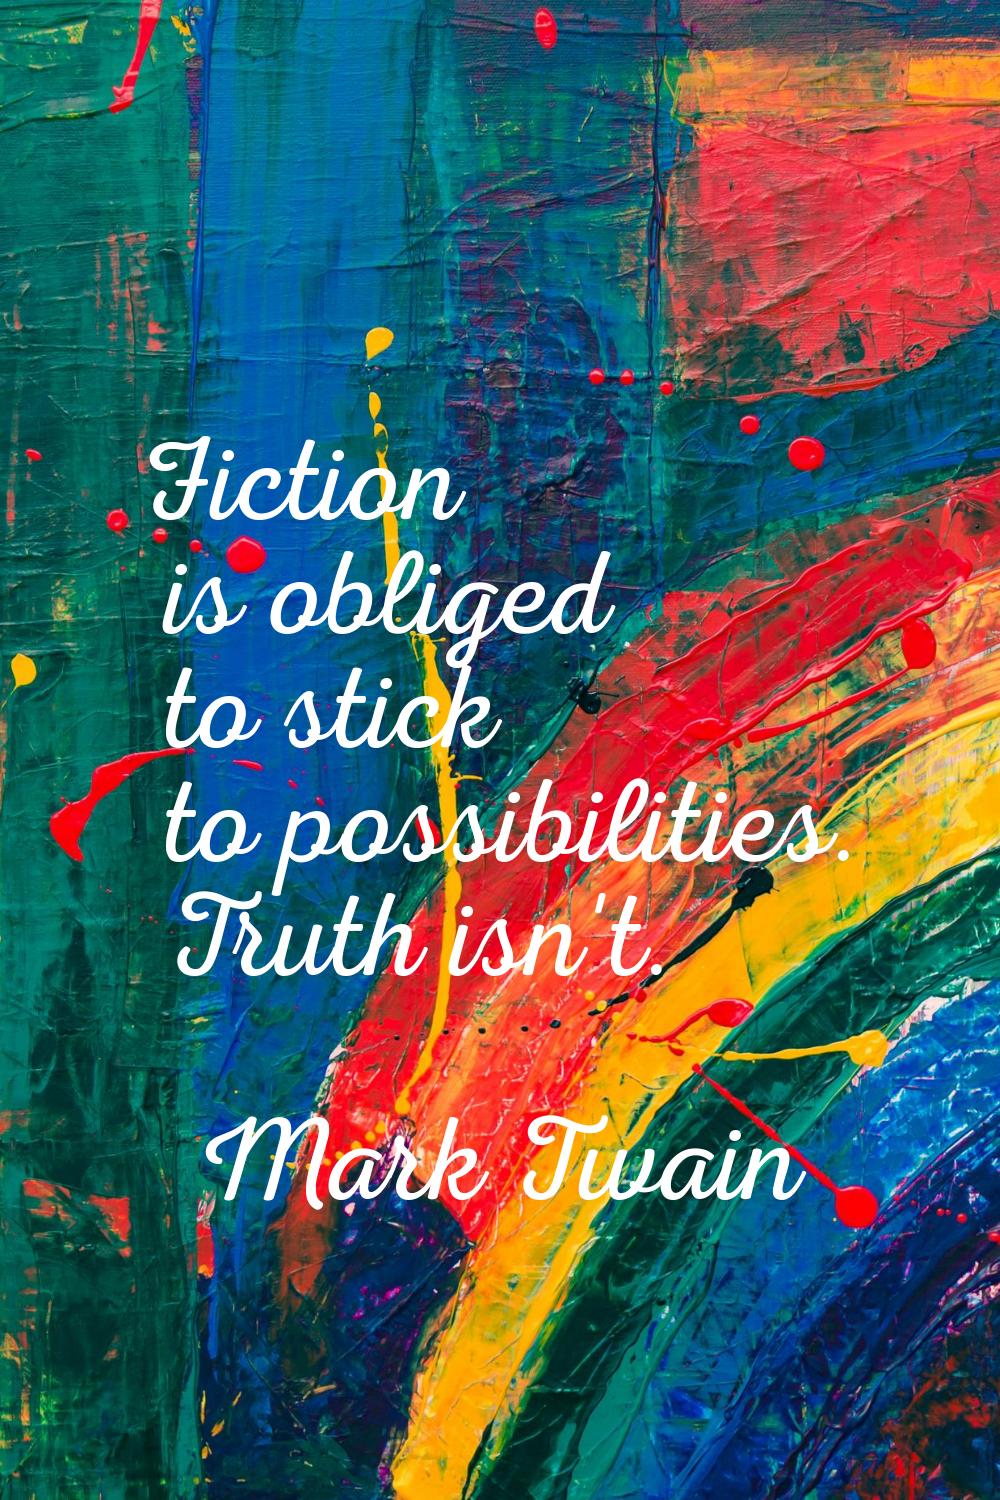 Fiction is obliged to stick to possibilities. Truth isn't.